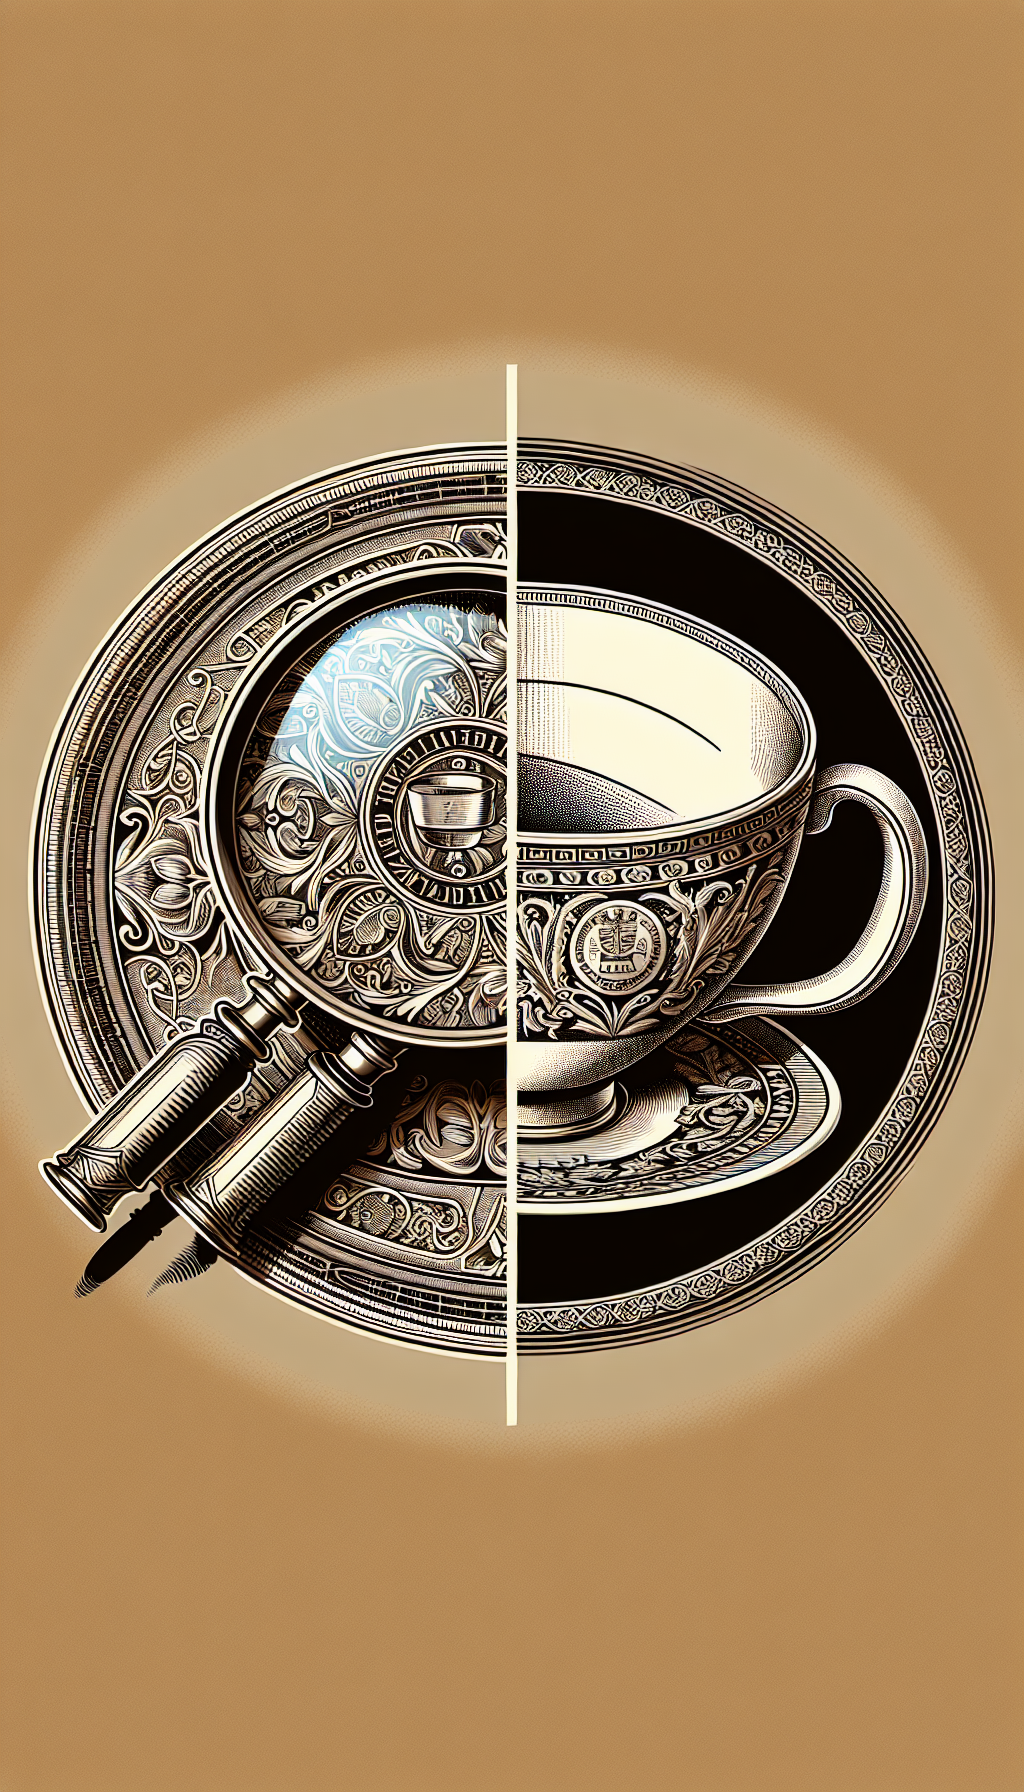 An intricate illustration showcases a magnifying glass hovering over the base of an ornate porcelain teacup, revealing detailed hallmark engravings. Half of the image is styled in sepia tones and Victorian linework, emphasizing the antique aspect, while the other half is in vivid colors, with modern, sharp lines highlighting the superior craftsmanship and continuity of quality through the ages.